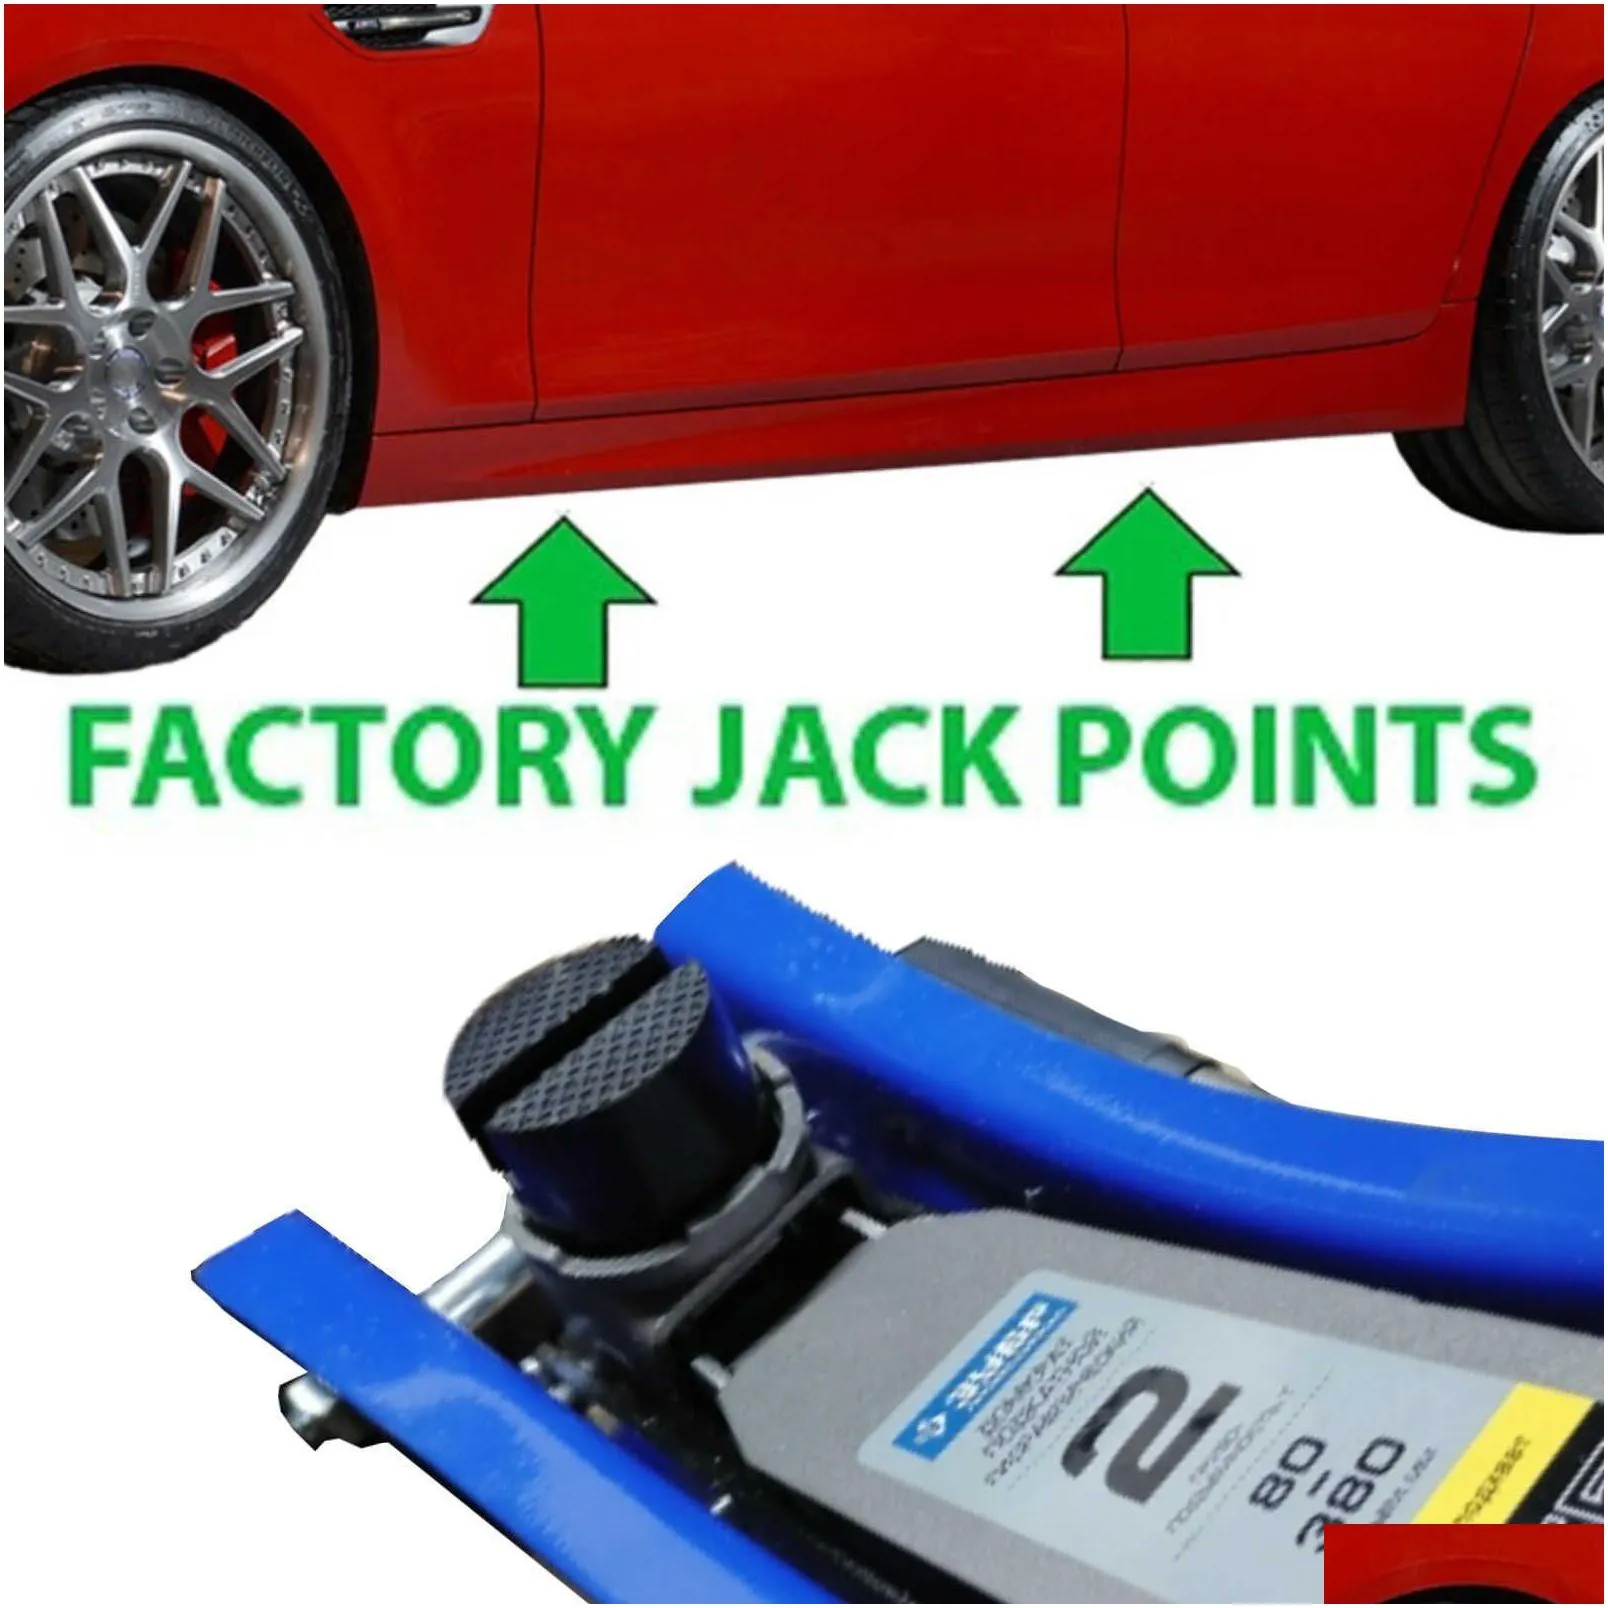 New Floor Slotted Car Jack Rubber Pad Frame Protector Adapter Jacking Tool Pinch Weld Side Lifting Disk For Lexus Subaru Fiat Volvo